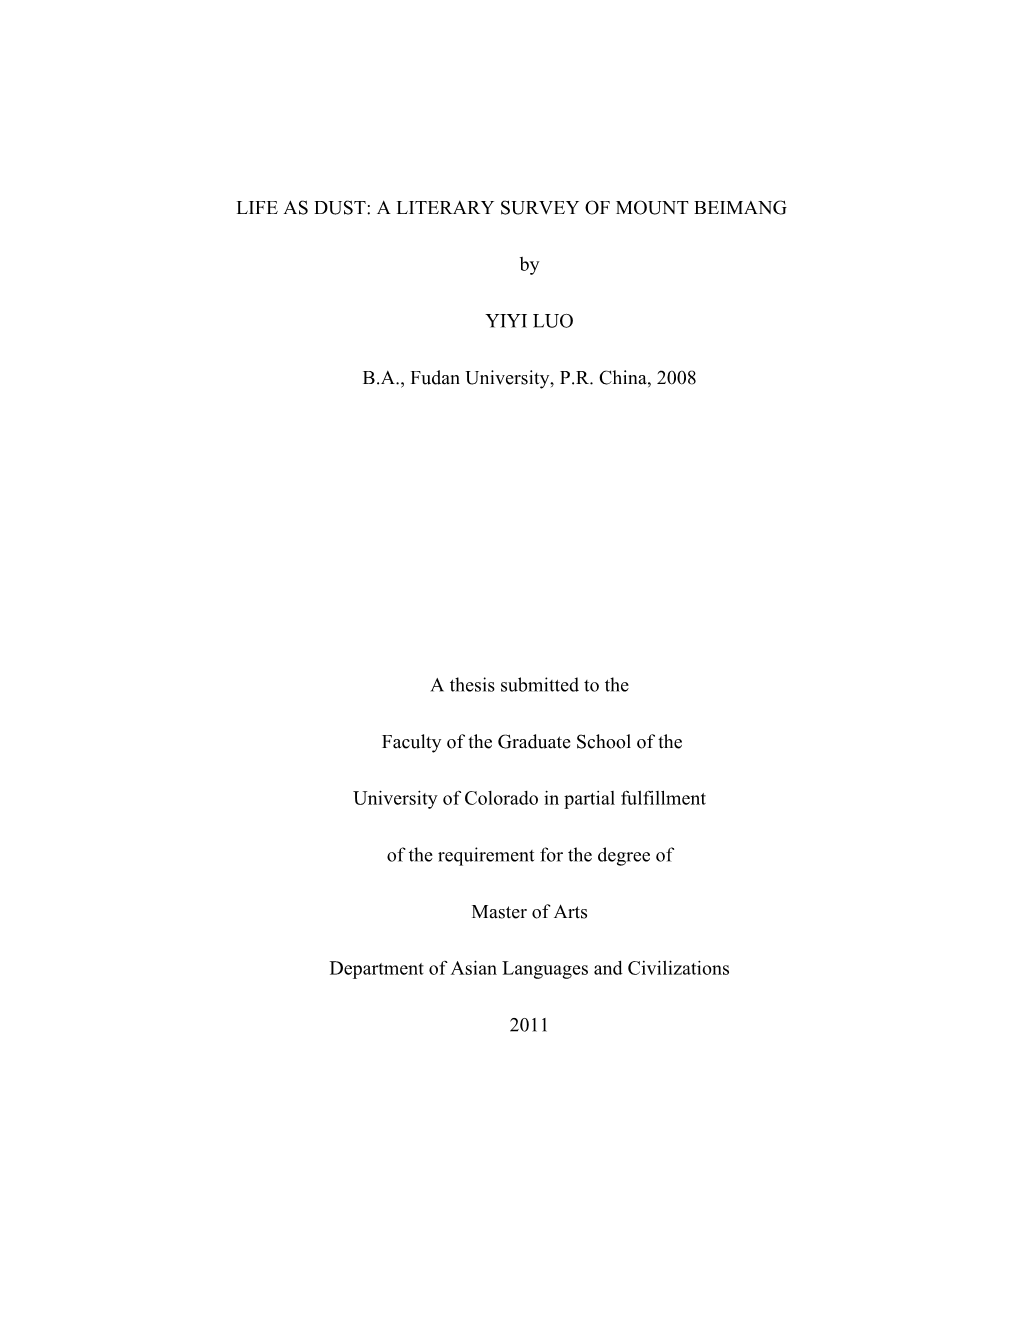 A LITERARY SURVEY of MOUNT BEIMANG by YIYI LUO BA, Fudan University, PR China, 2008 a Thesis Submitted to Th